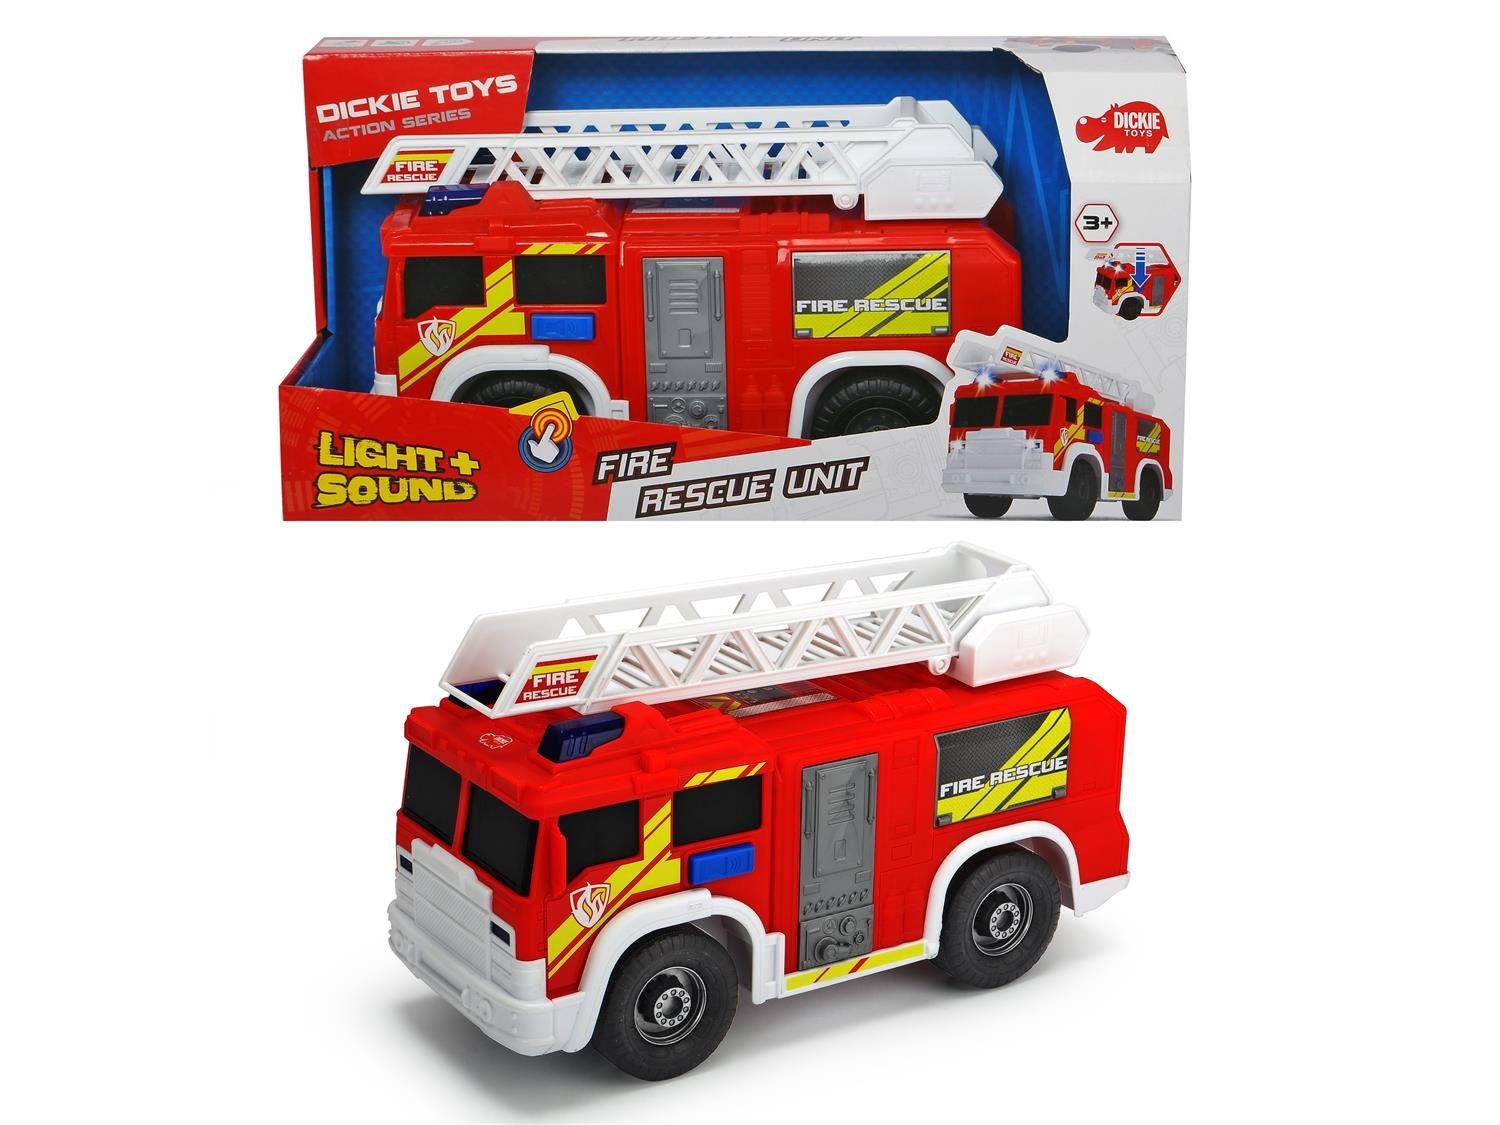 SIMBA Spielzeug-Feuerwehr Dickie Toys 203306000 - Fire Rescue Unit